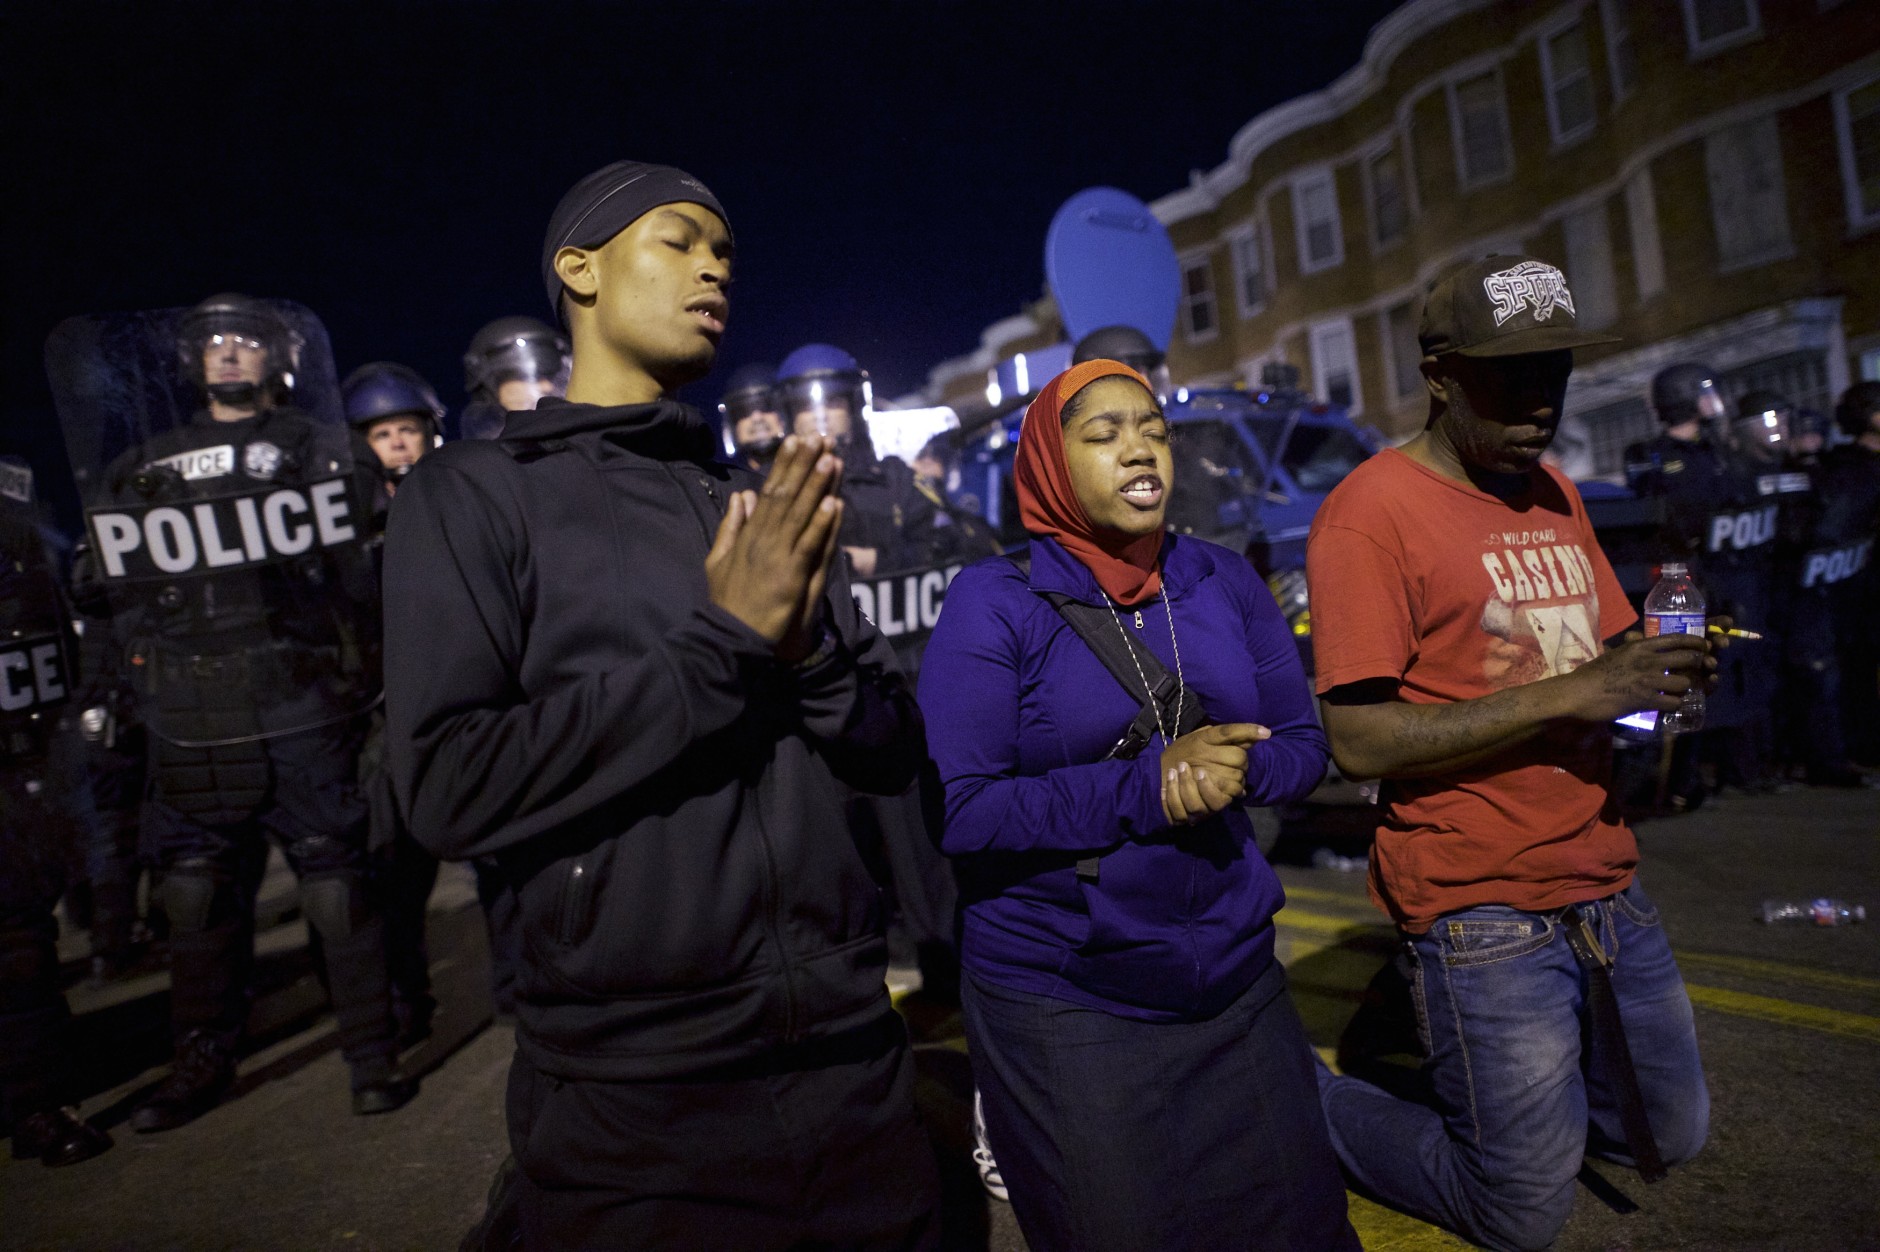 Protestors say the Lord's Prayer beside riot police the night after citywide riots over the death of Freddie Gray on April 28, 2015 in Baltimore, Maryland. Freddie Gray, 25, was arrested for possessing a switch blade knife April 12 outside the Gilmor Houses housing project on Baltimore's west side. According to his attorney, Gray died a week later in the hospital from a severe spinal cord injury he received while in police custody. (Photo by Mark Makela/Getty Images)